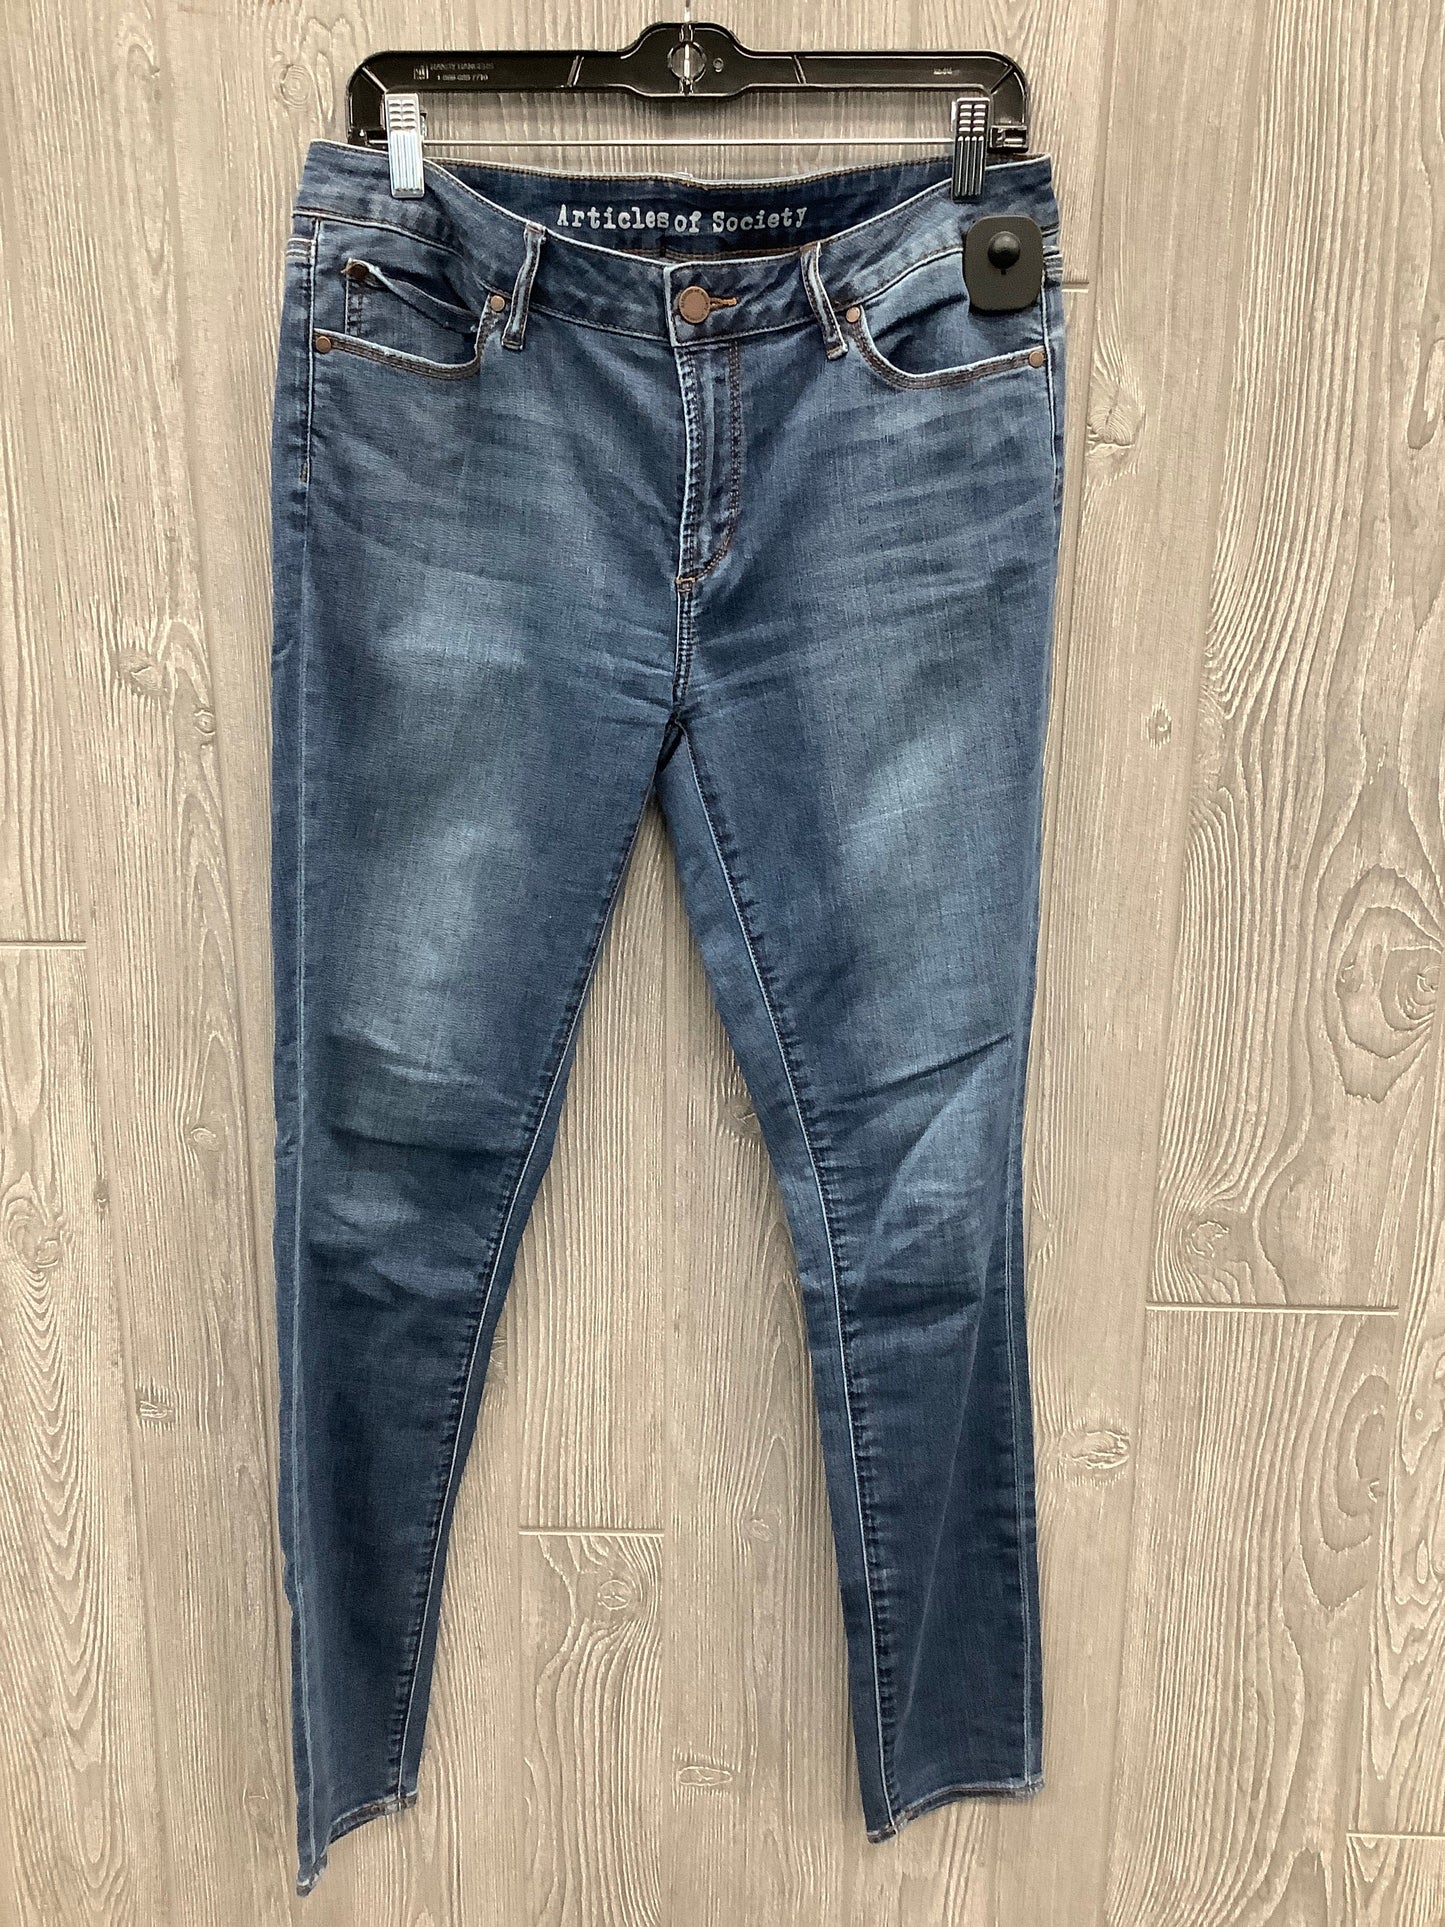 Jeans Skinny By Articles Of Society  Size: 10